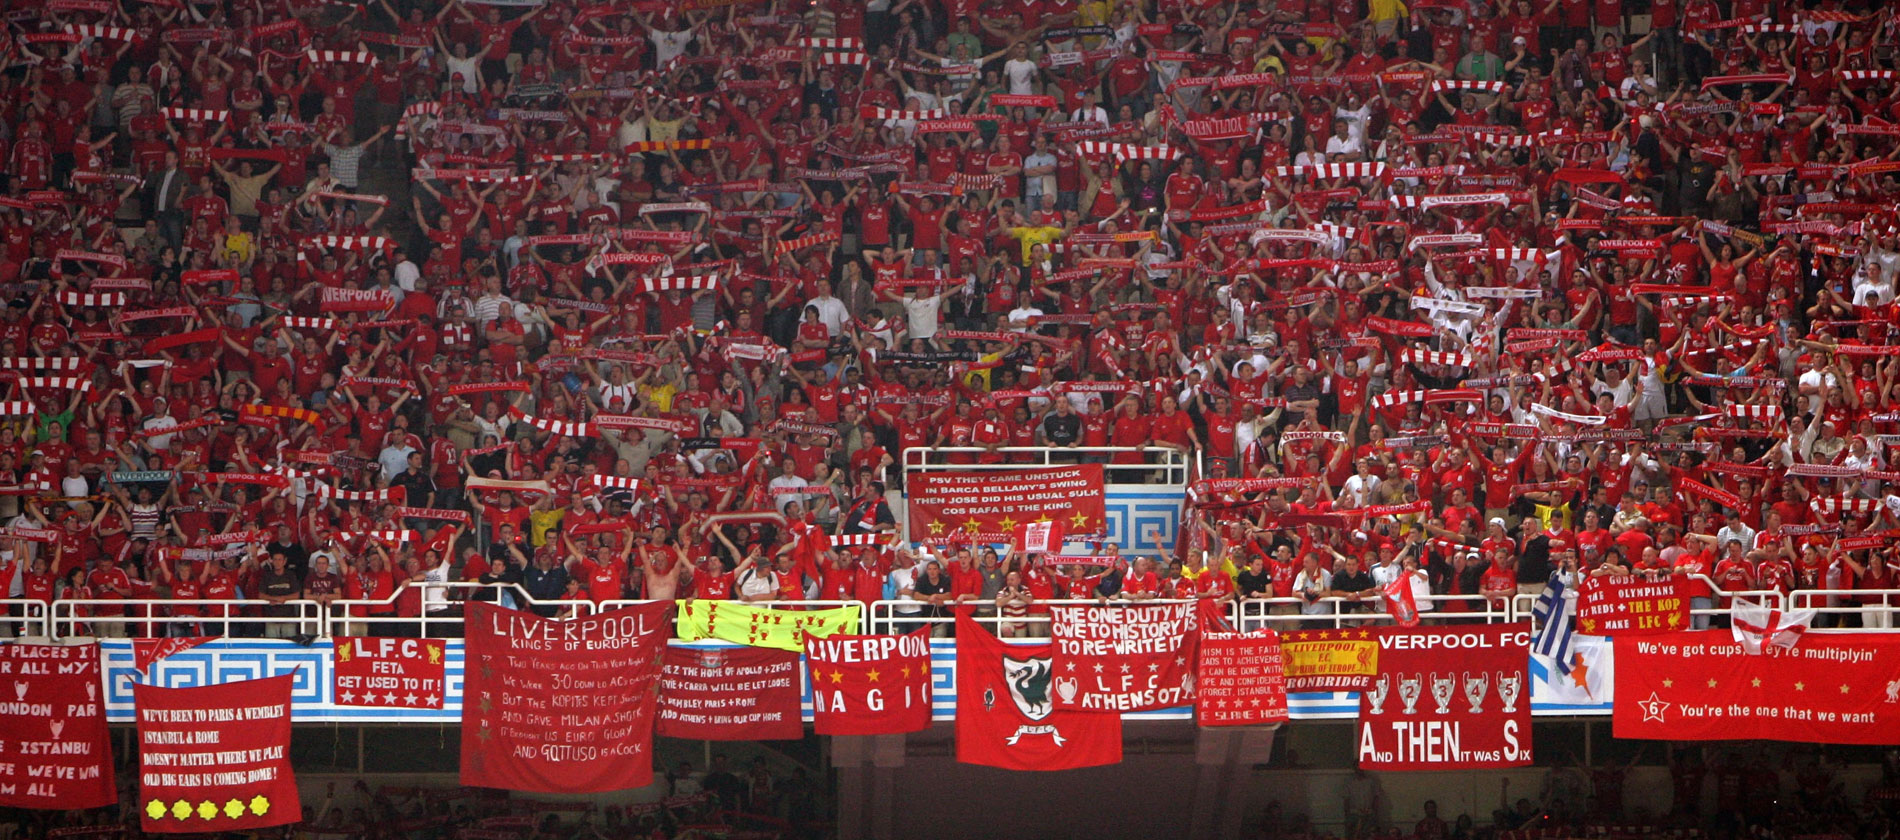 A passionate Liverpool crowd on a European night